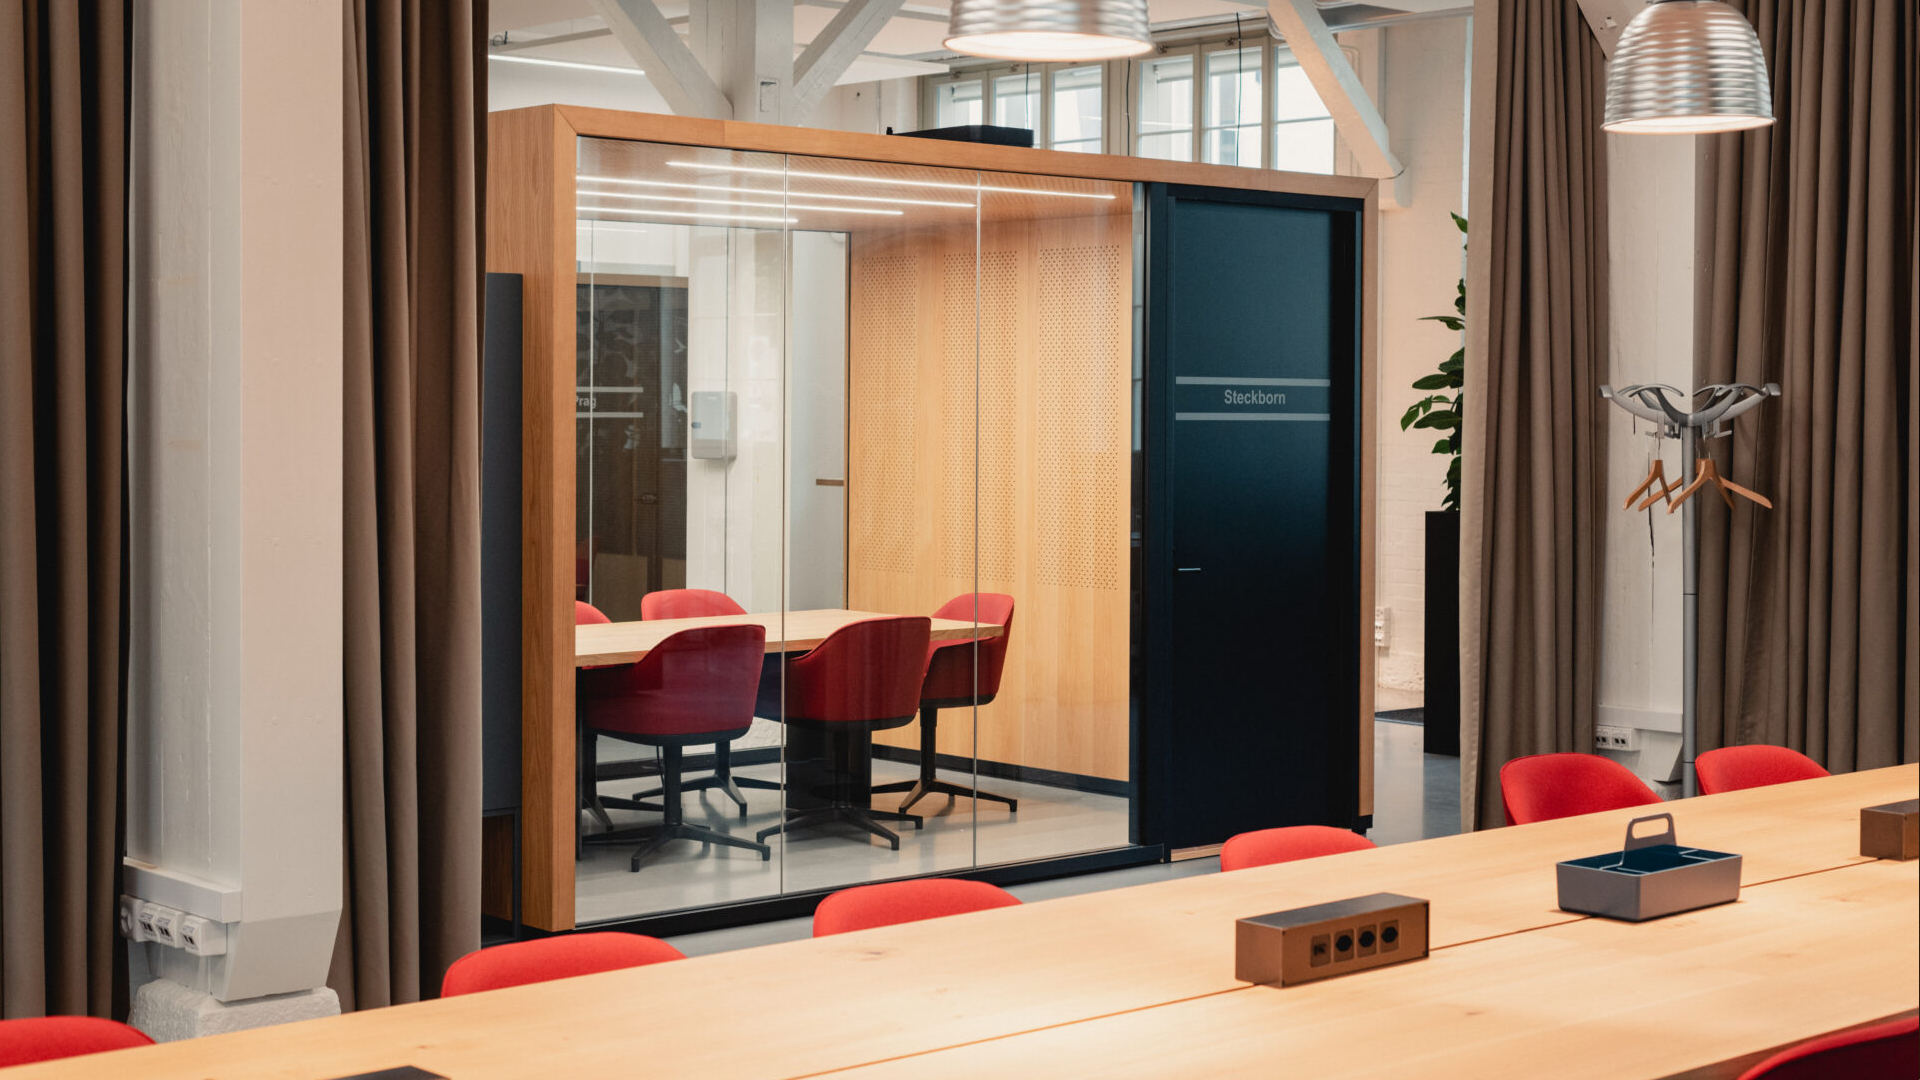 Tips for designing and decorating an office with pods